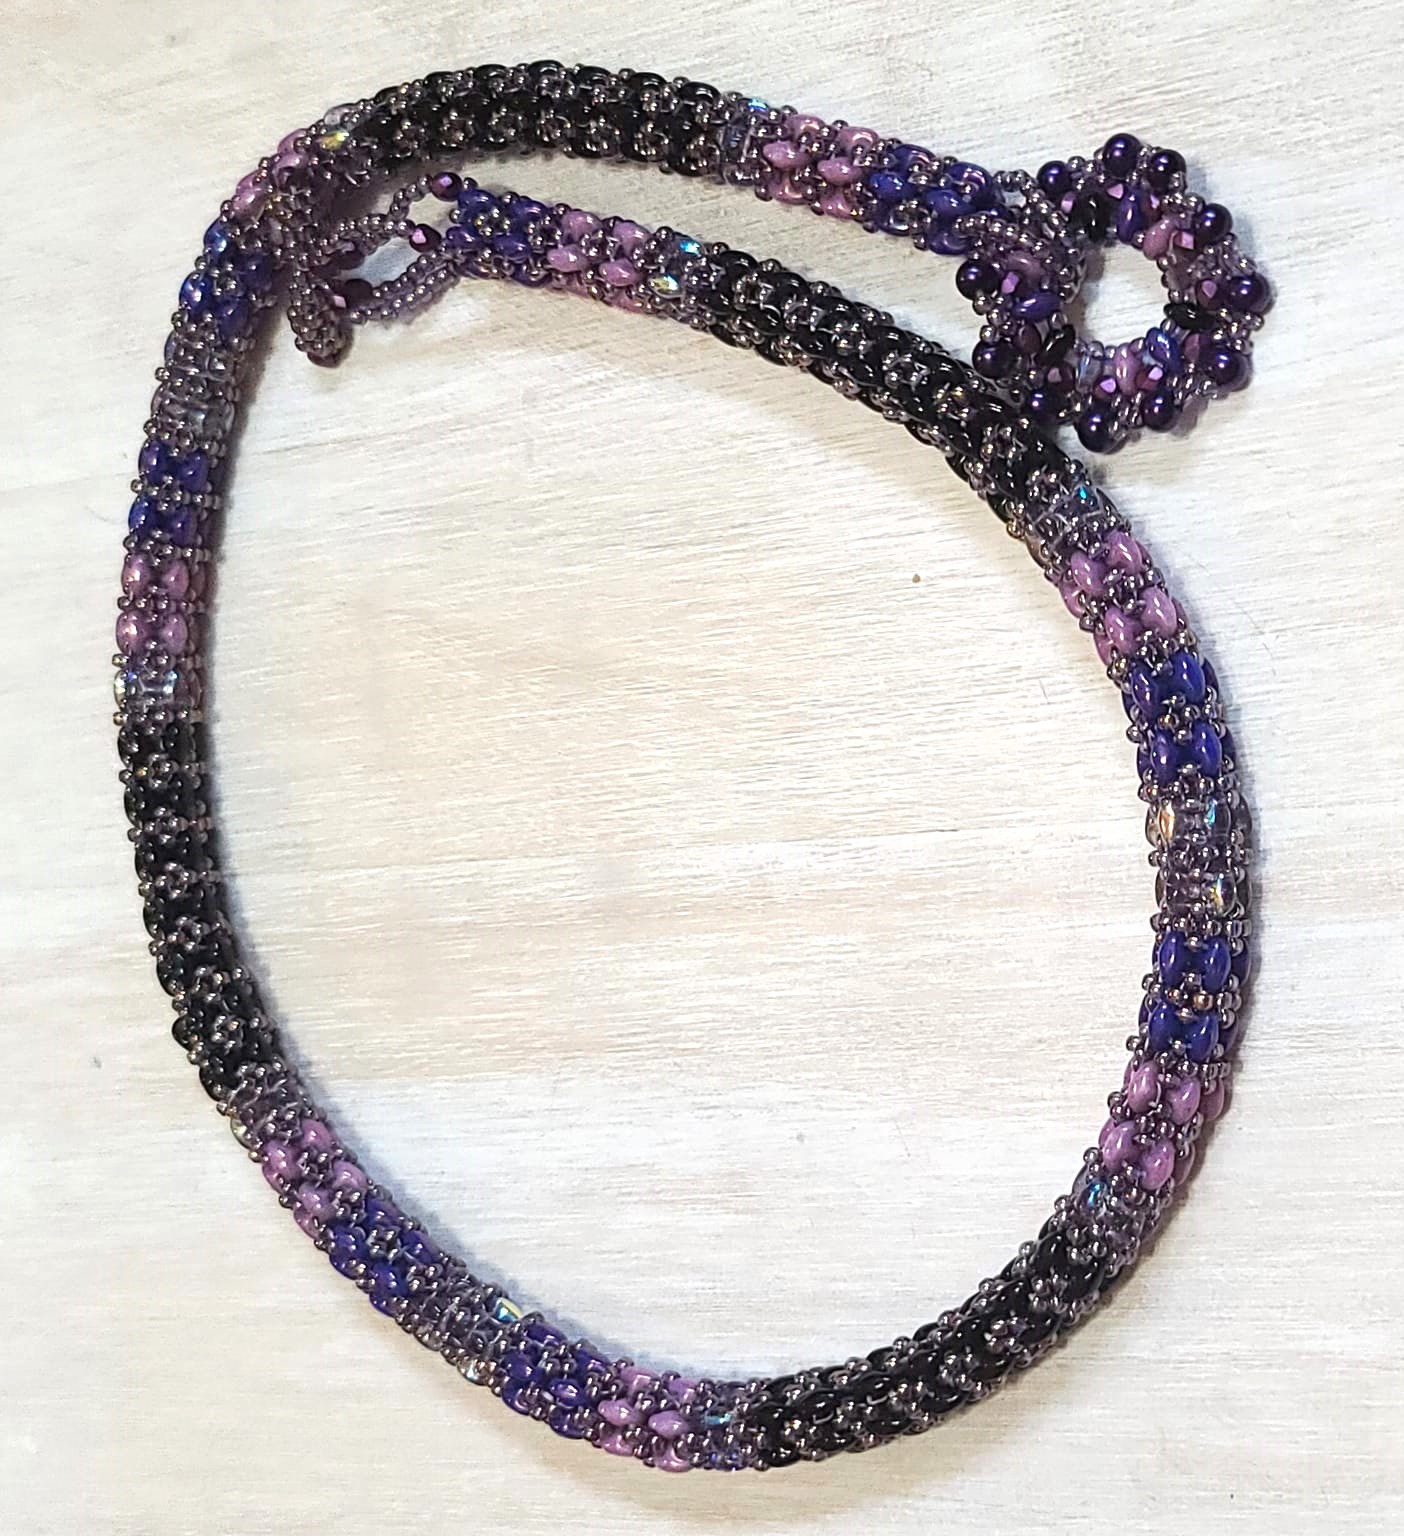 Beaded rope necklace, handcrafted, glass super duos and crystals